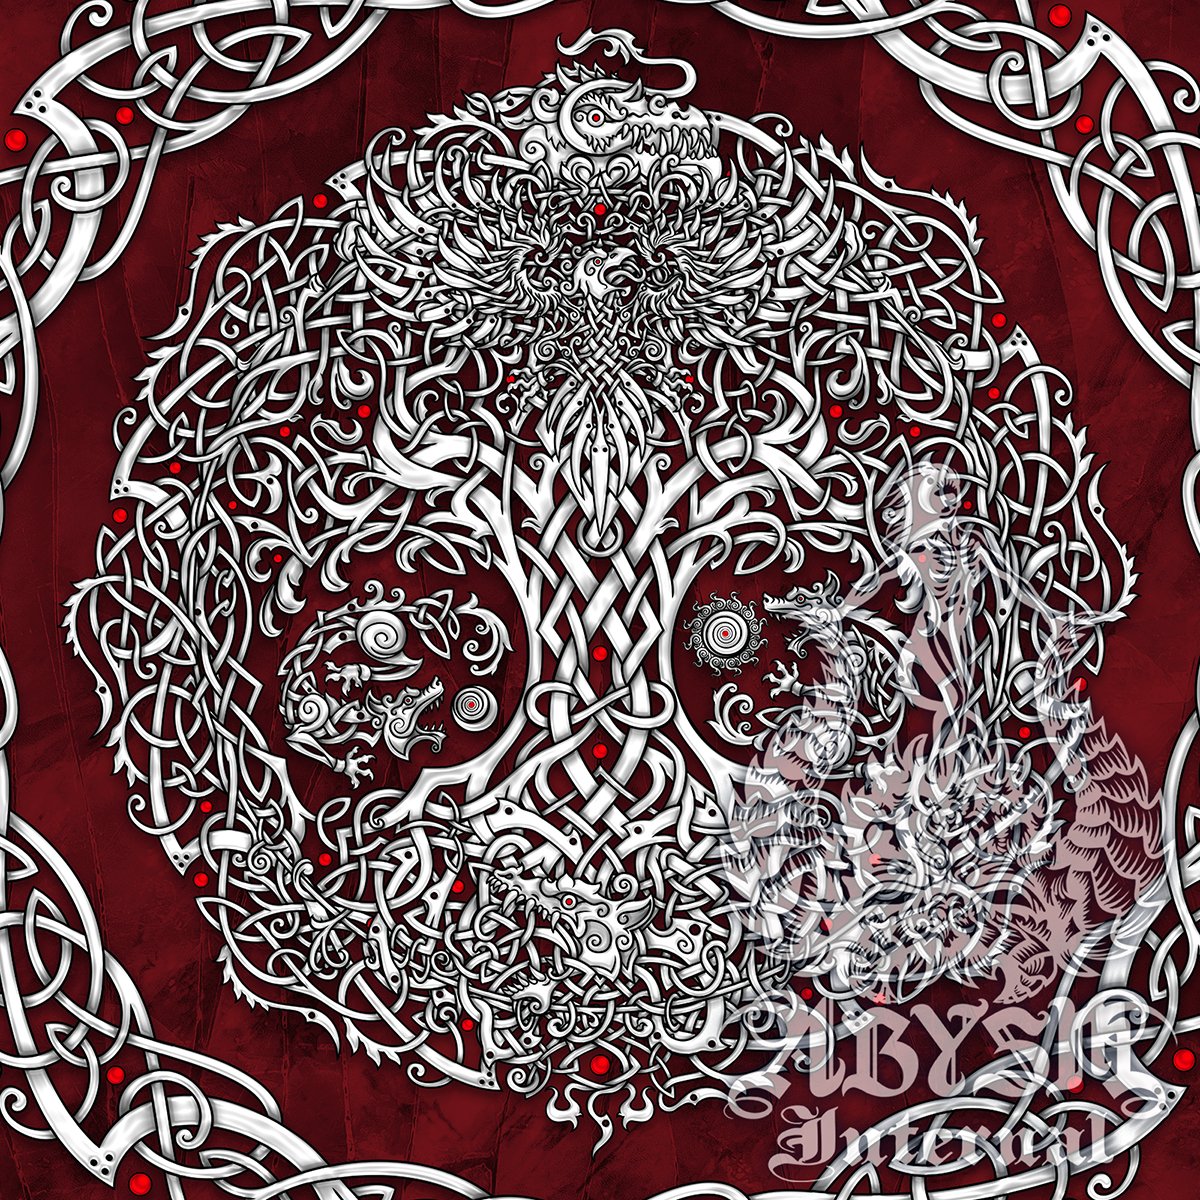 Personalized intricate Knotwork art, Viking or Celtic custom designs for fabrics, posters and covers - Abysm Internal